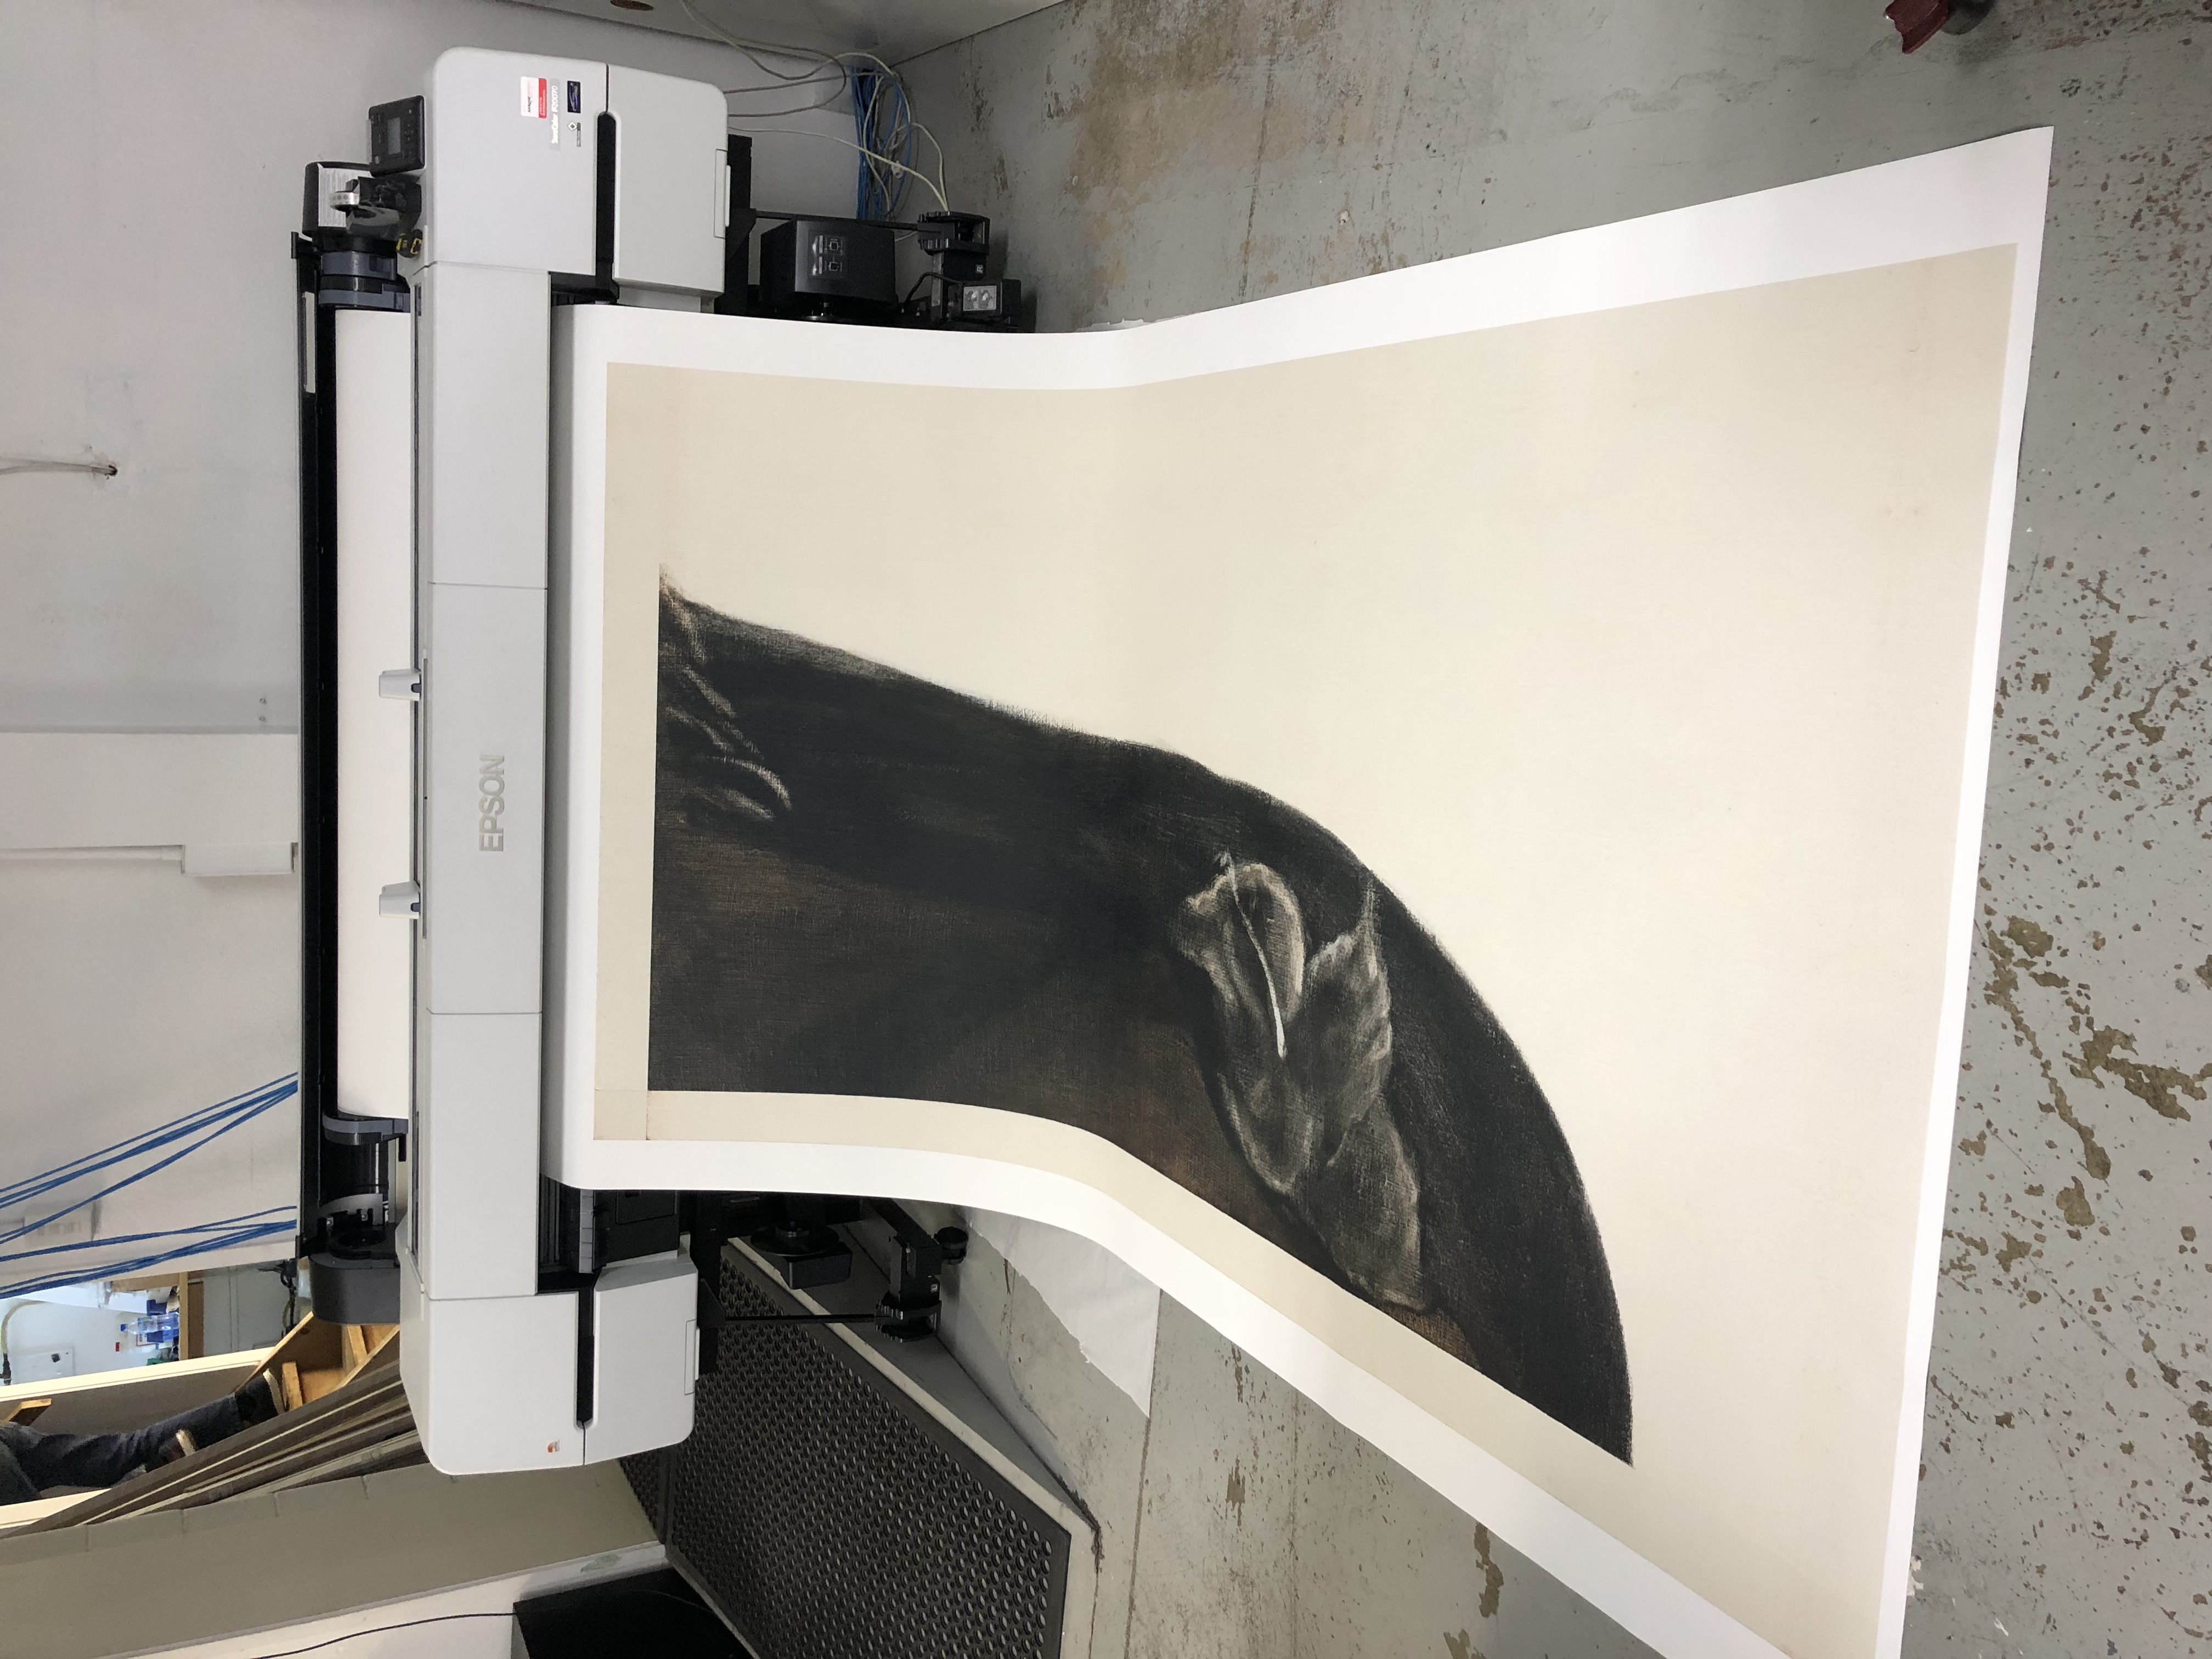 <p>Printing the reproduction of&nbsp;<em>The Ponsonby Madonna&nbsp;</em>at&nbsp;PCL Imaging. Image courtesy of PCL Imaging</p>
